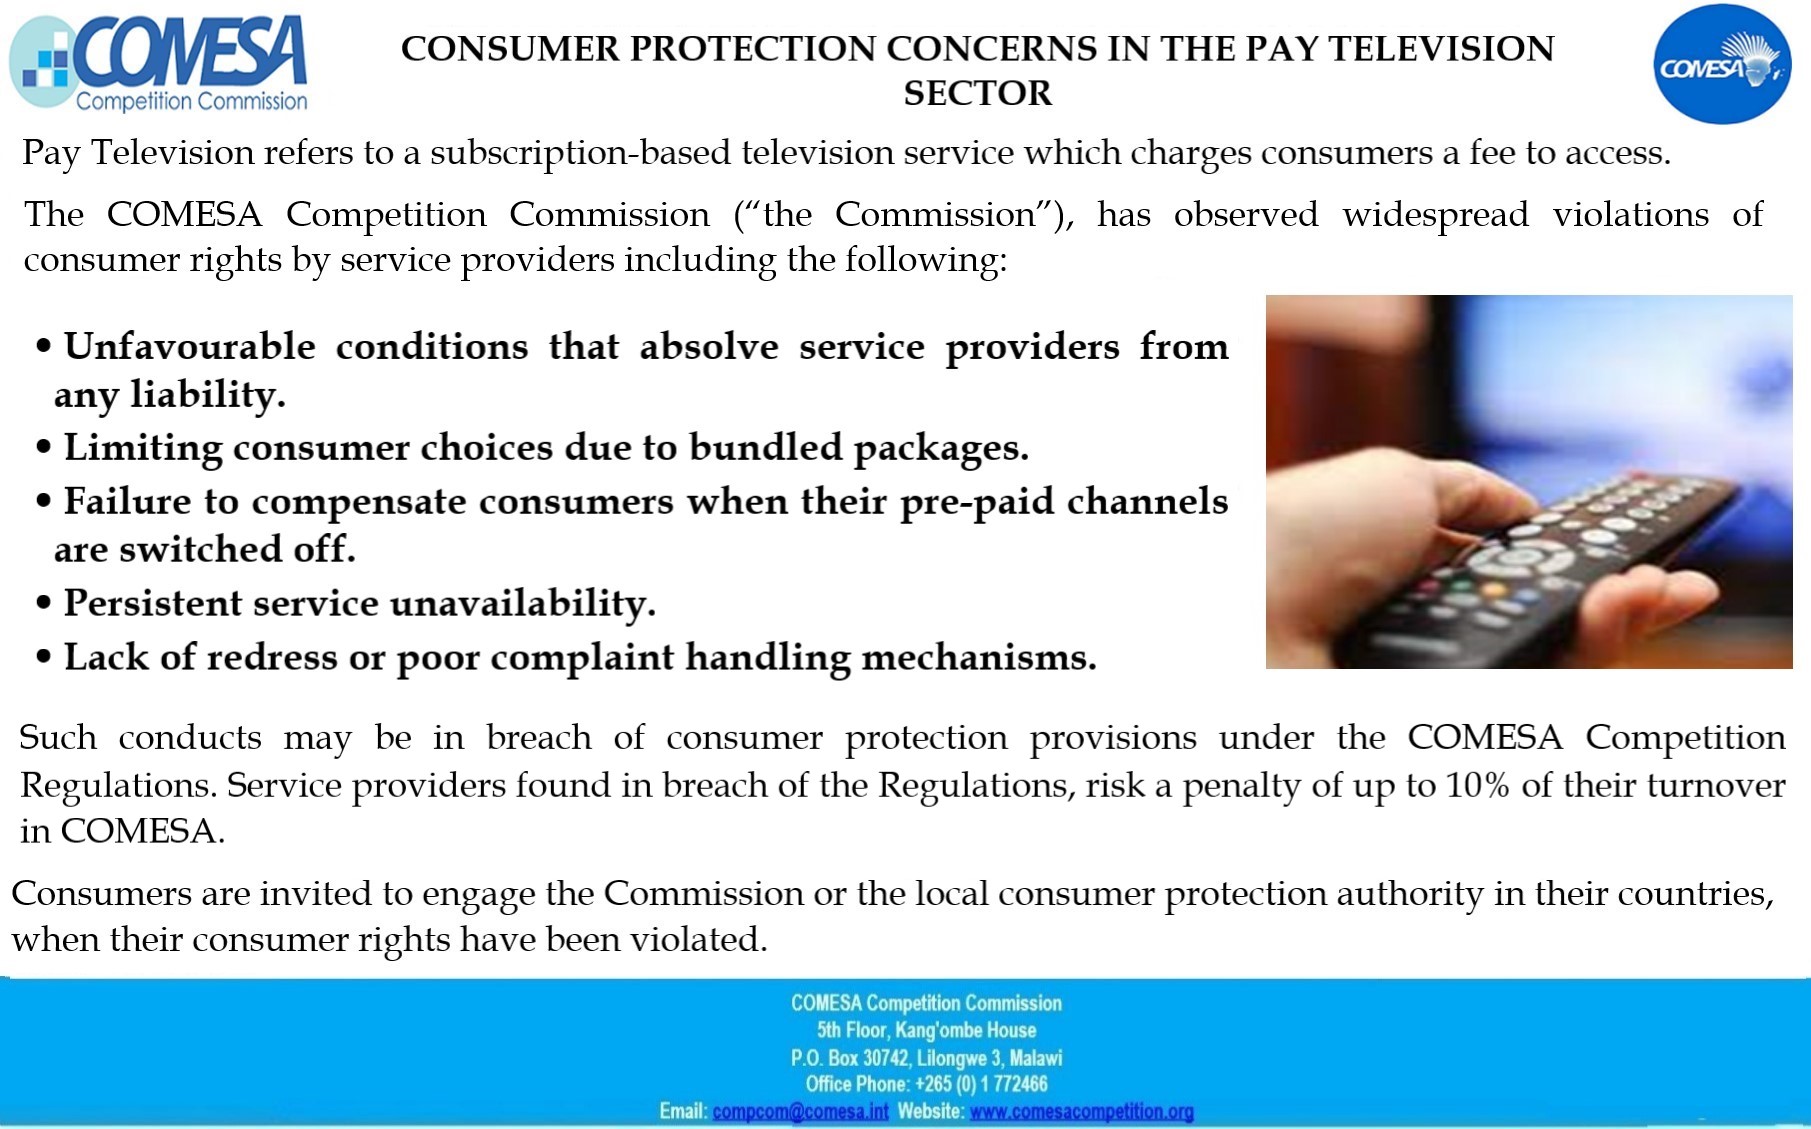 Consumer Protection Concerns in the Pay Television Sector